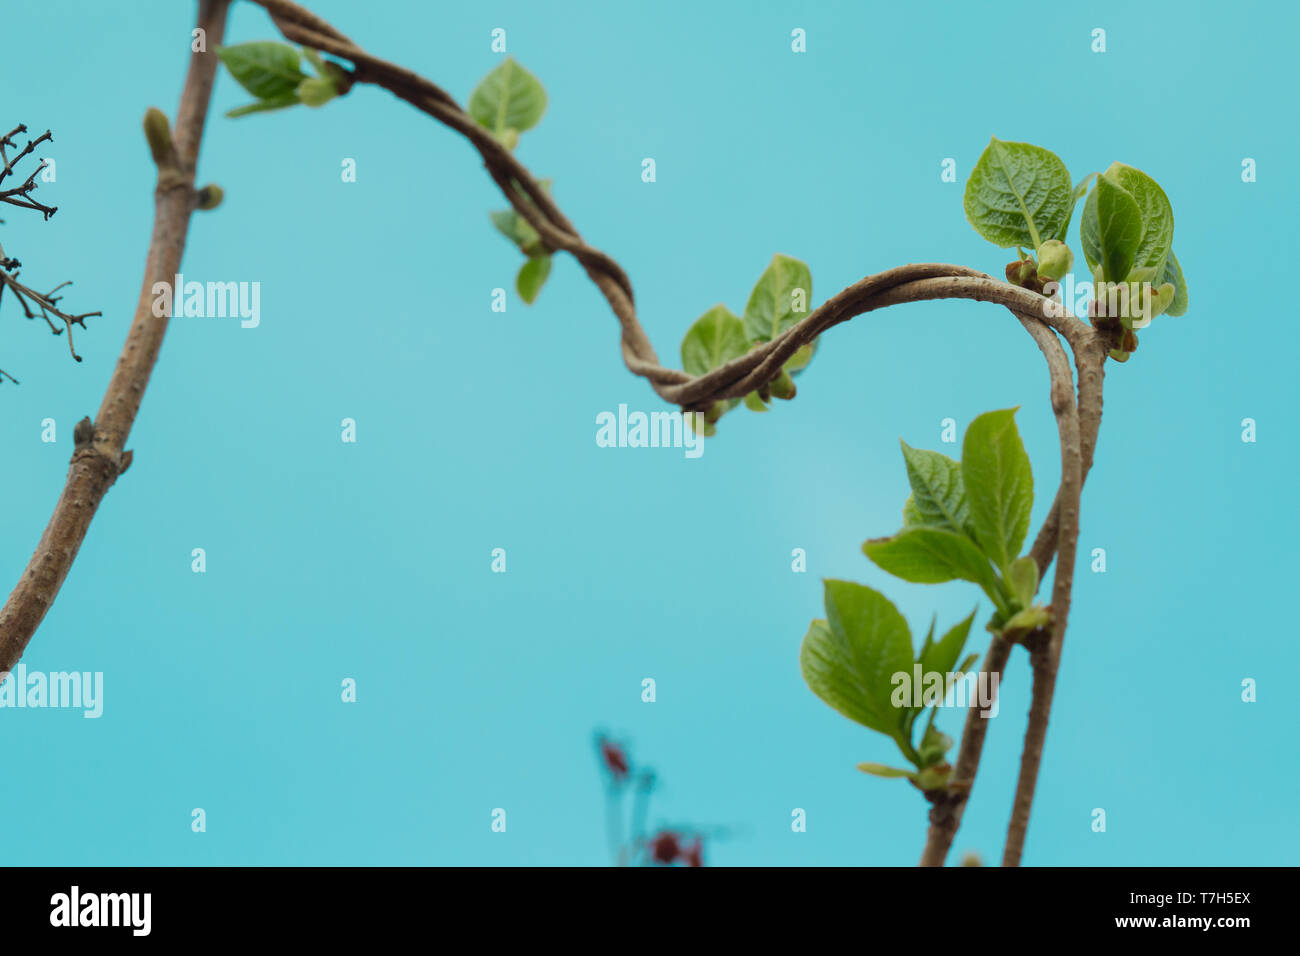 Loach, ivy, a plant that crawls intertwining with each other up. Blue background, isolated. Stock Photo